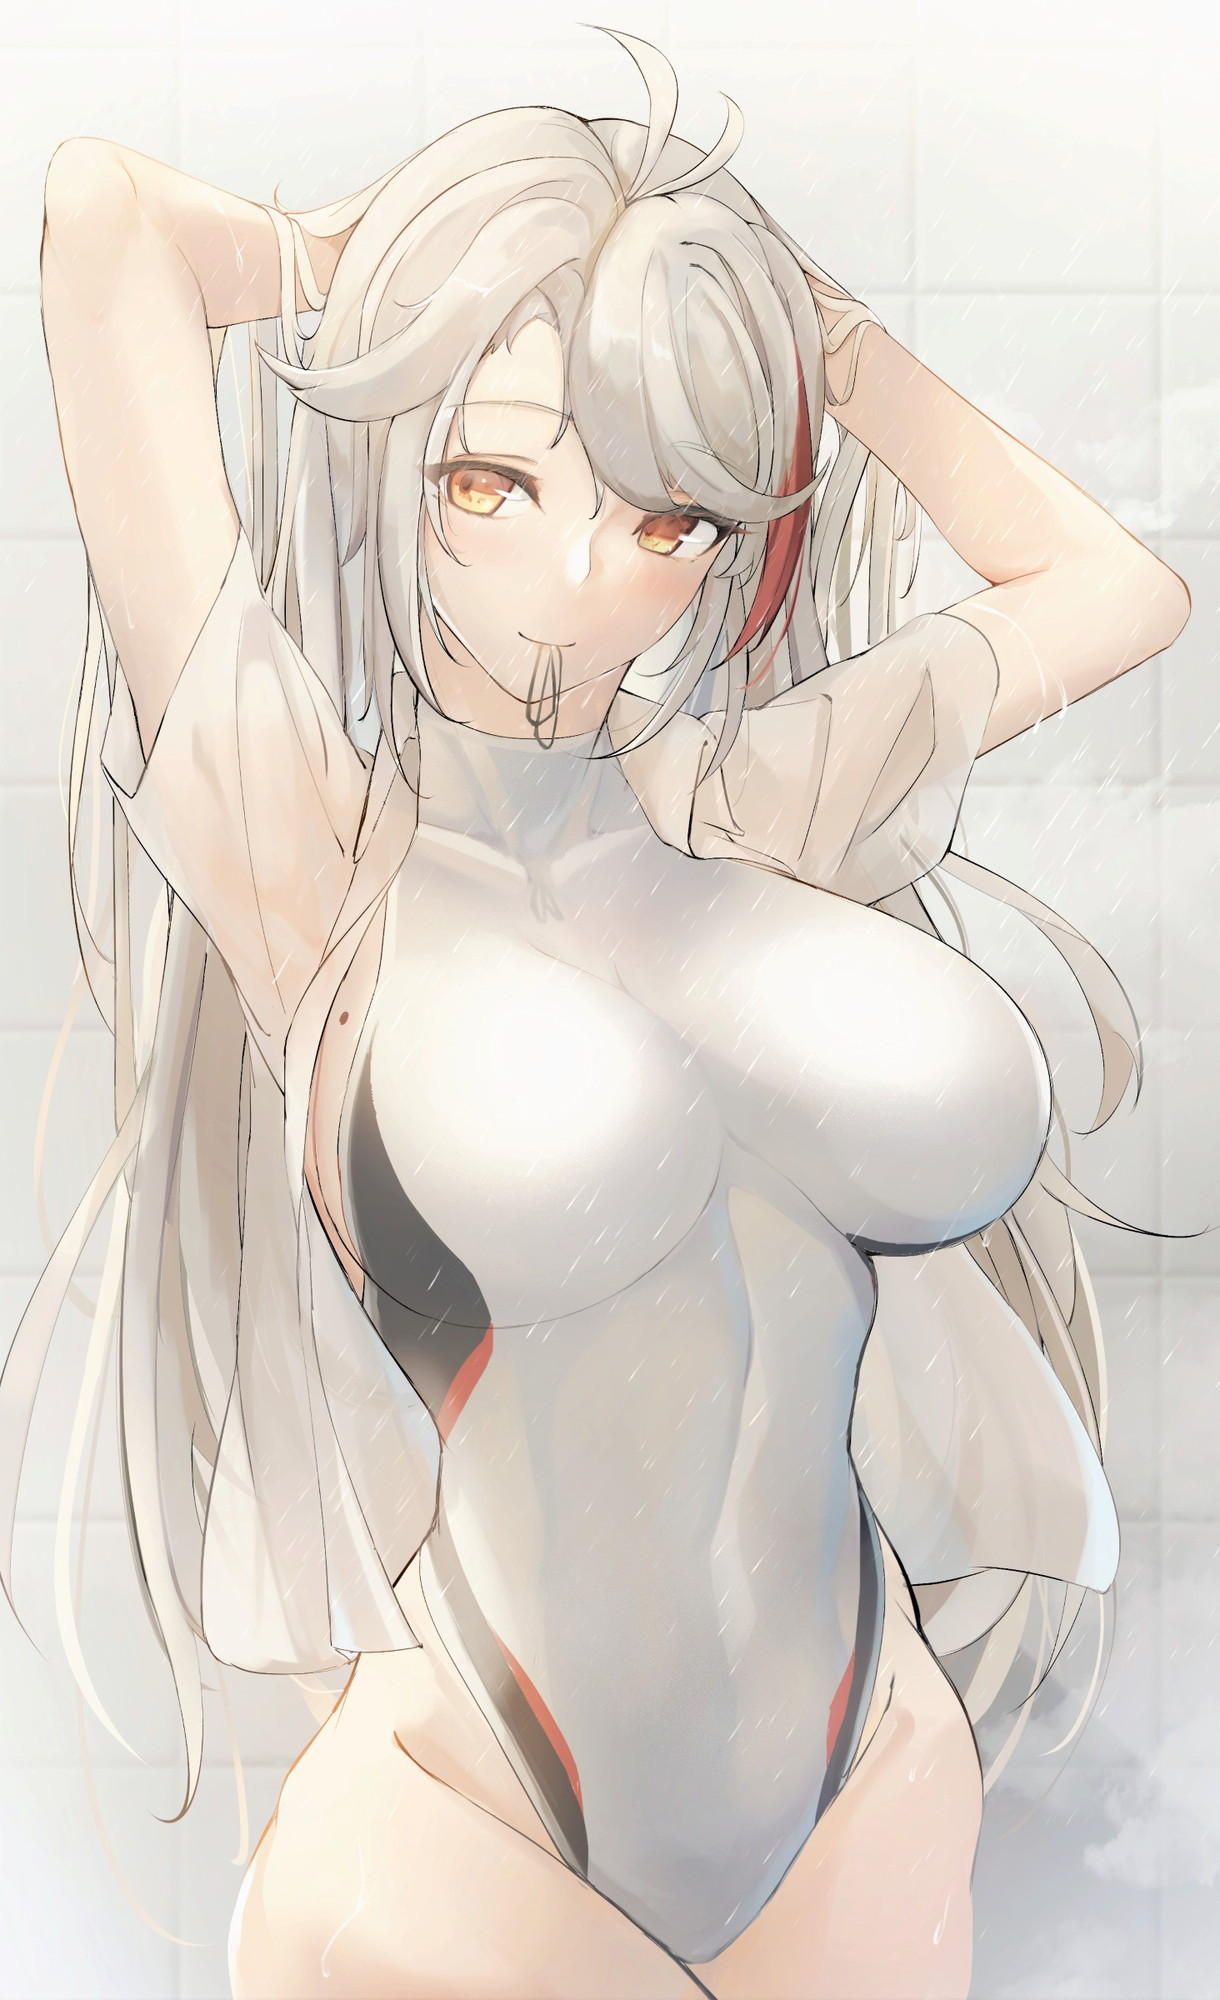 You want to see naughty images of baths, hot springs, and shower scenes, right? 4